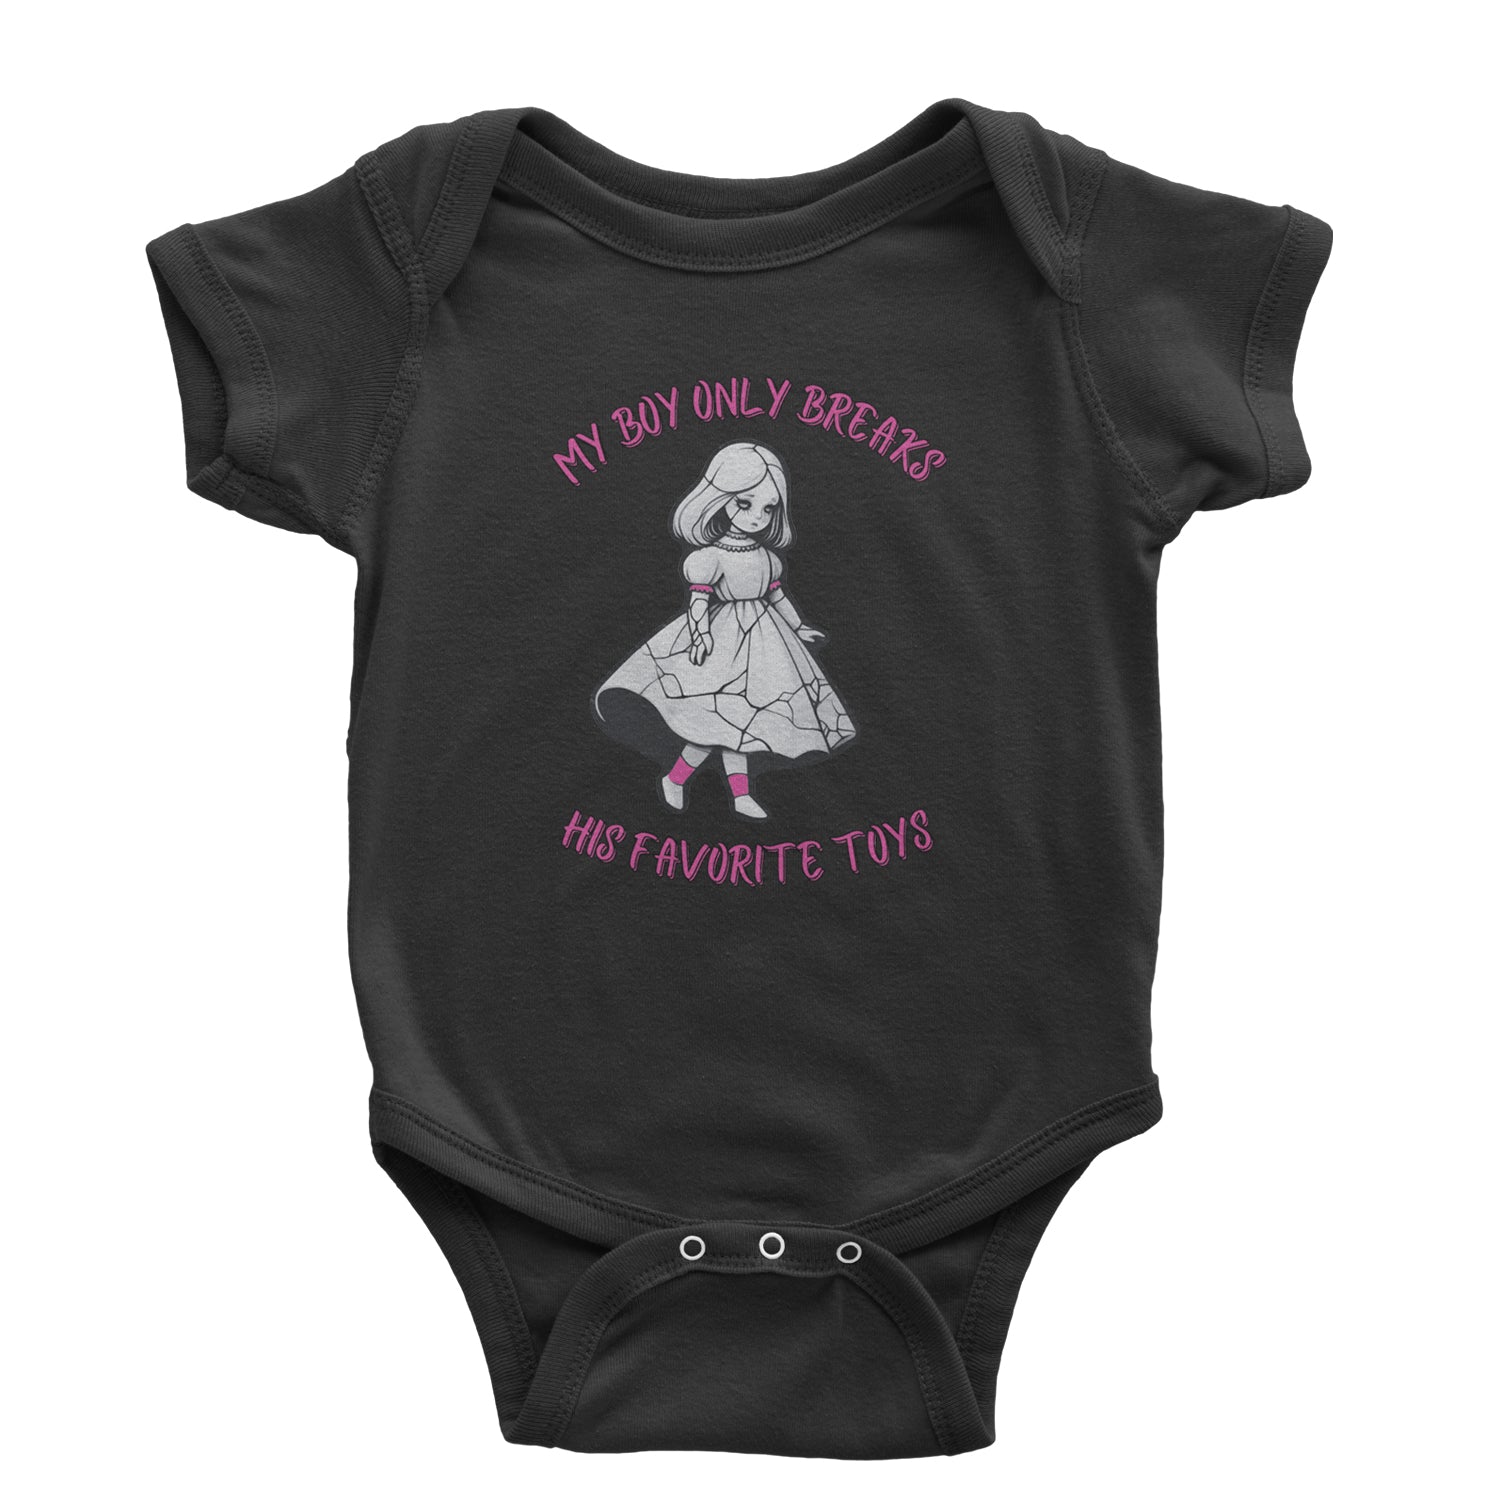 My Boy Only Breaks His Favorite Toys TTPD Music Infant One-Piece Romper Bodysuit and Toddler T-shirt